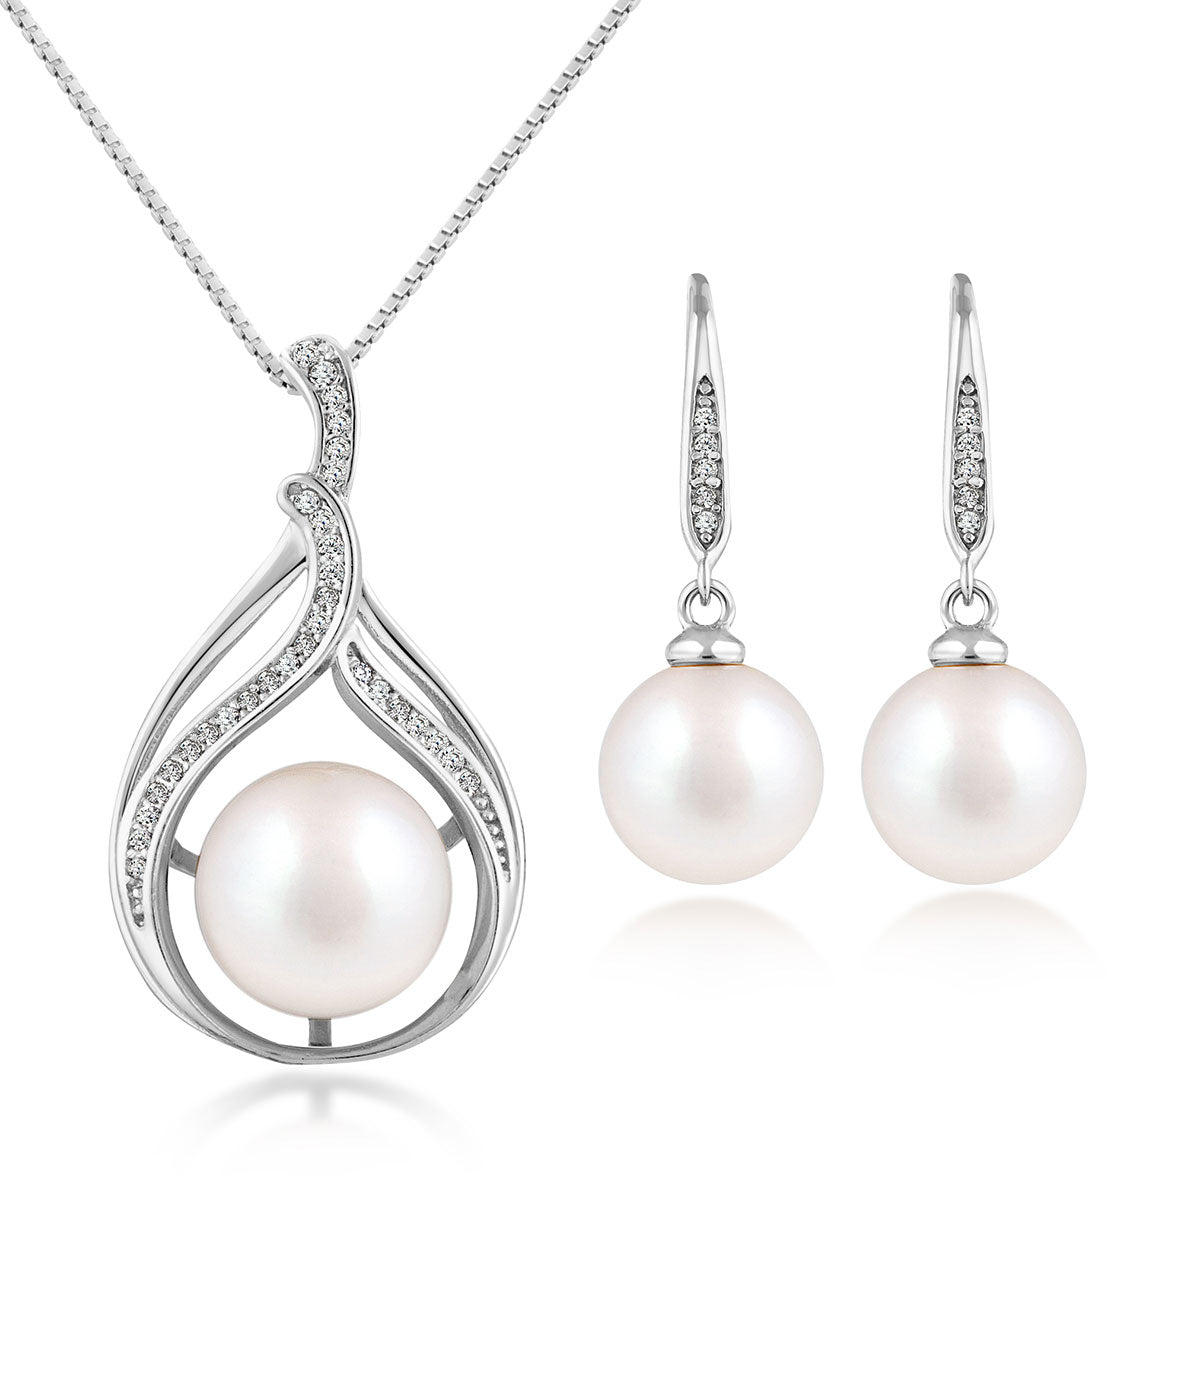 Bella Pearl Pendant Necklace and Earrings Set 925 Sterling Silver with Dazzling Zirconia